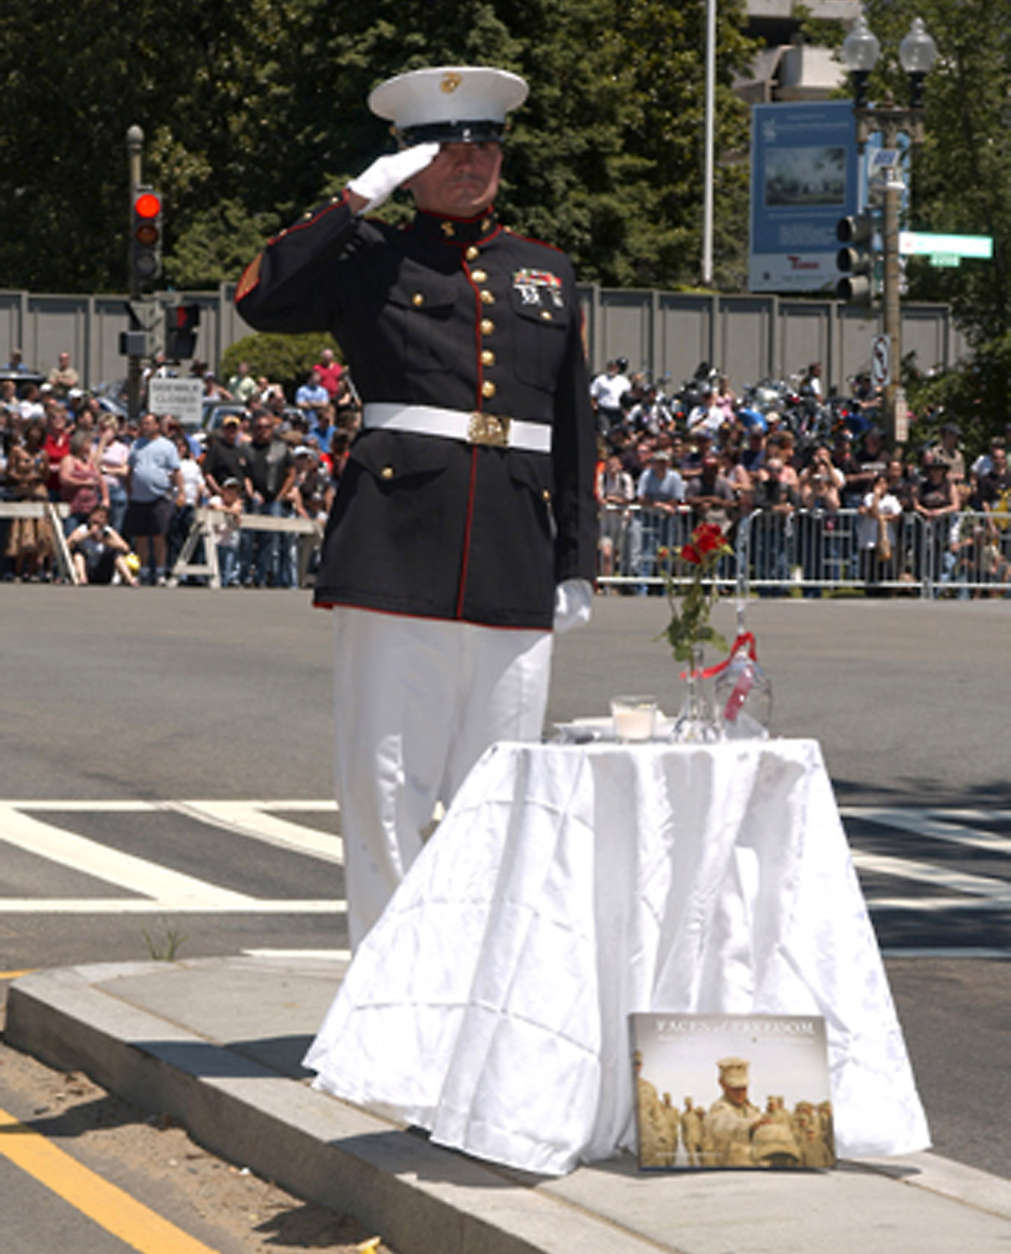 A saluting member of theMarine Corps honors a fallen comrade at the 25th annual demonstration Rolling Thunder demonstration in D.C. The group remains resolved to help bring home prisoners of war and those missing in action. (Courtesy Rolling Thunder)